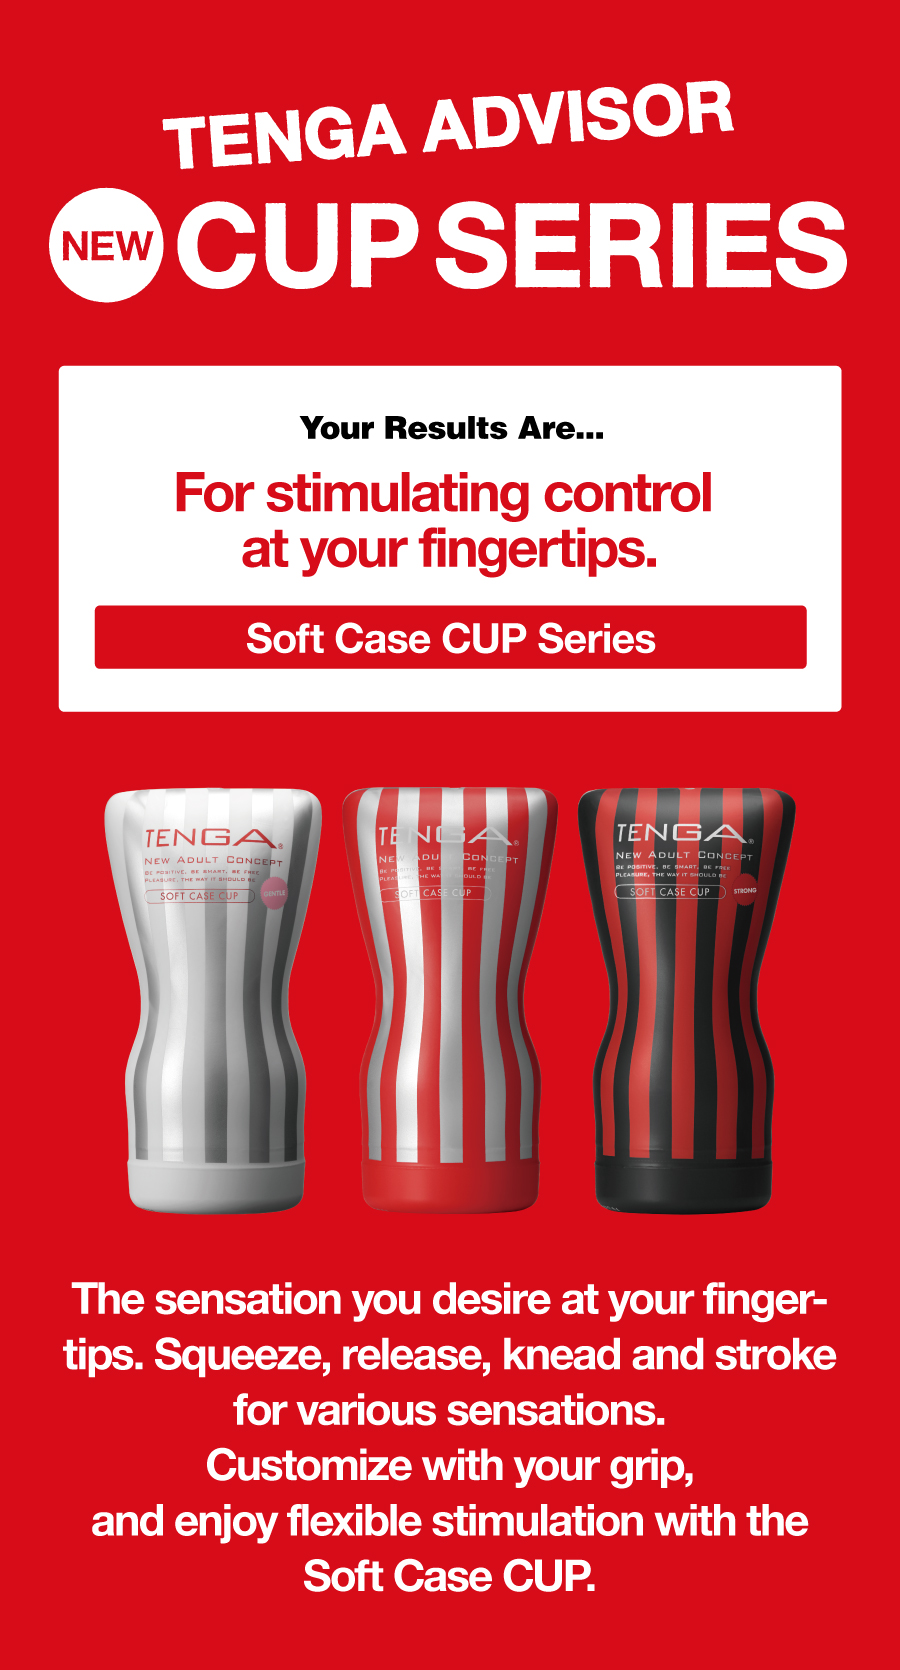 TENGA ADVISOR NEW CUP SERIES Your Results Are... For stimulating control at your fingertips. Soft Case CUP Series The sensation you desire at your fingertips. Squeeze, release, knead and stroke for various sensations. Customize with your grip, and enjoy flexible stimulation with the Soft Case CUP.